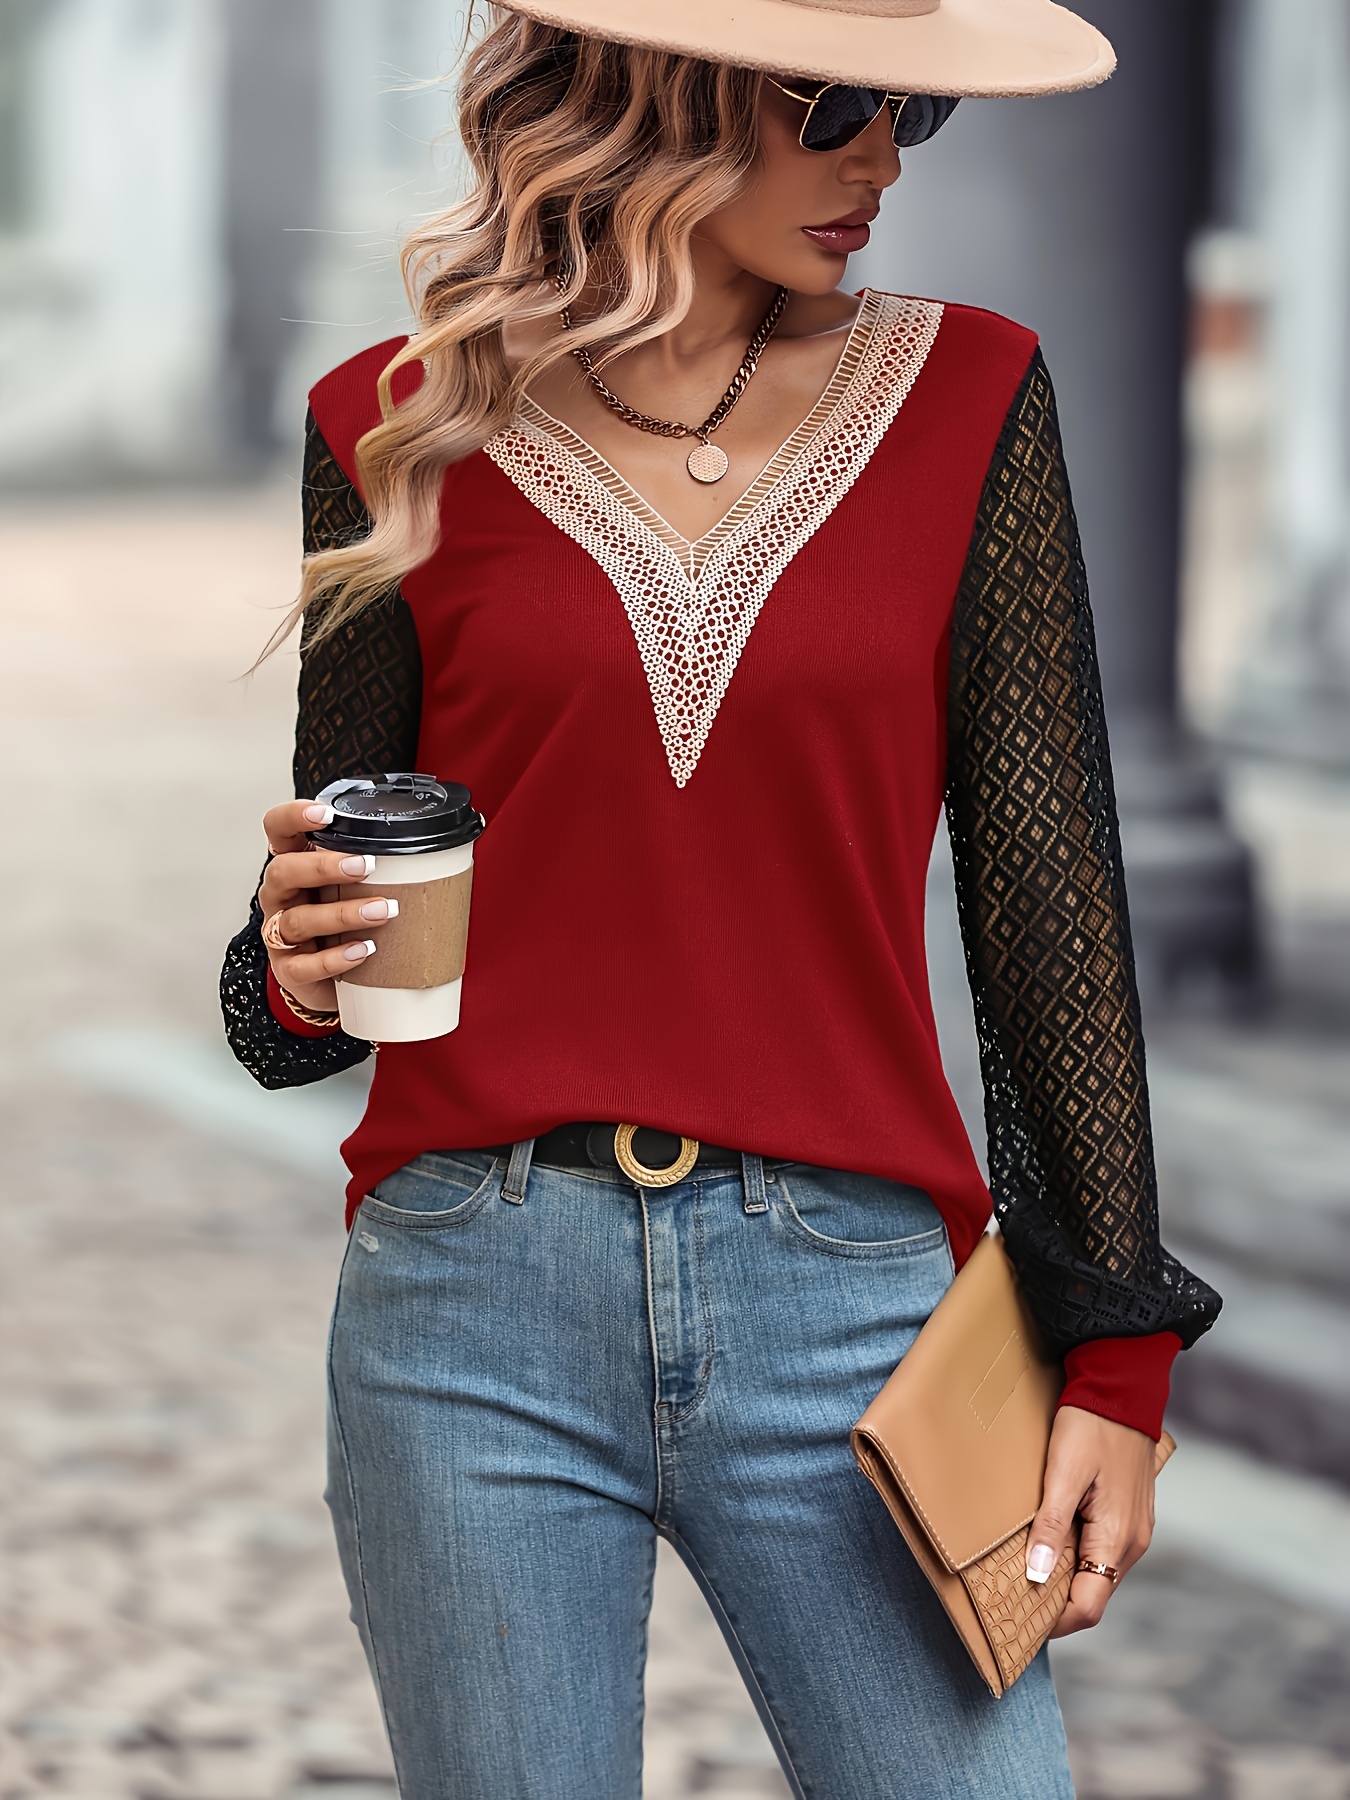 V-neck loose casual autumn and winter women's tops – KesleyBoutique